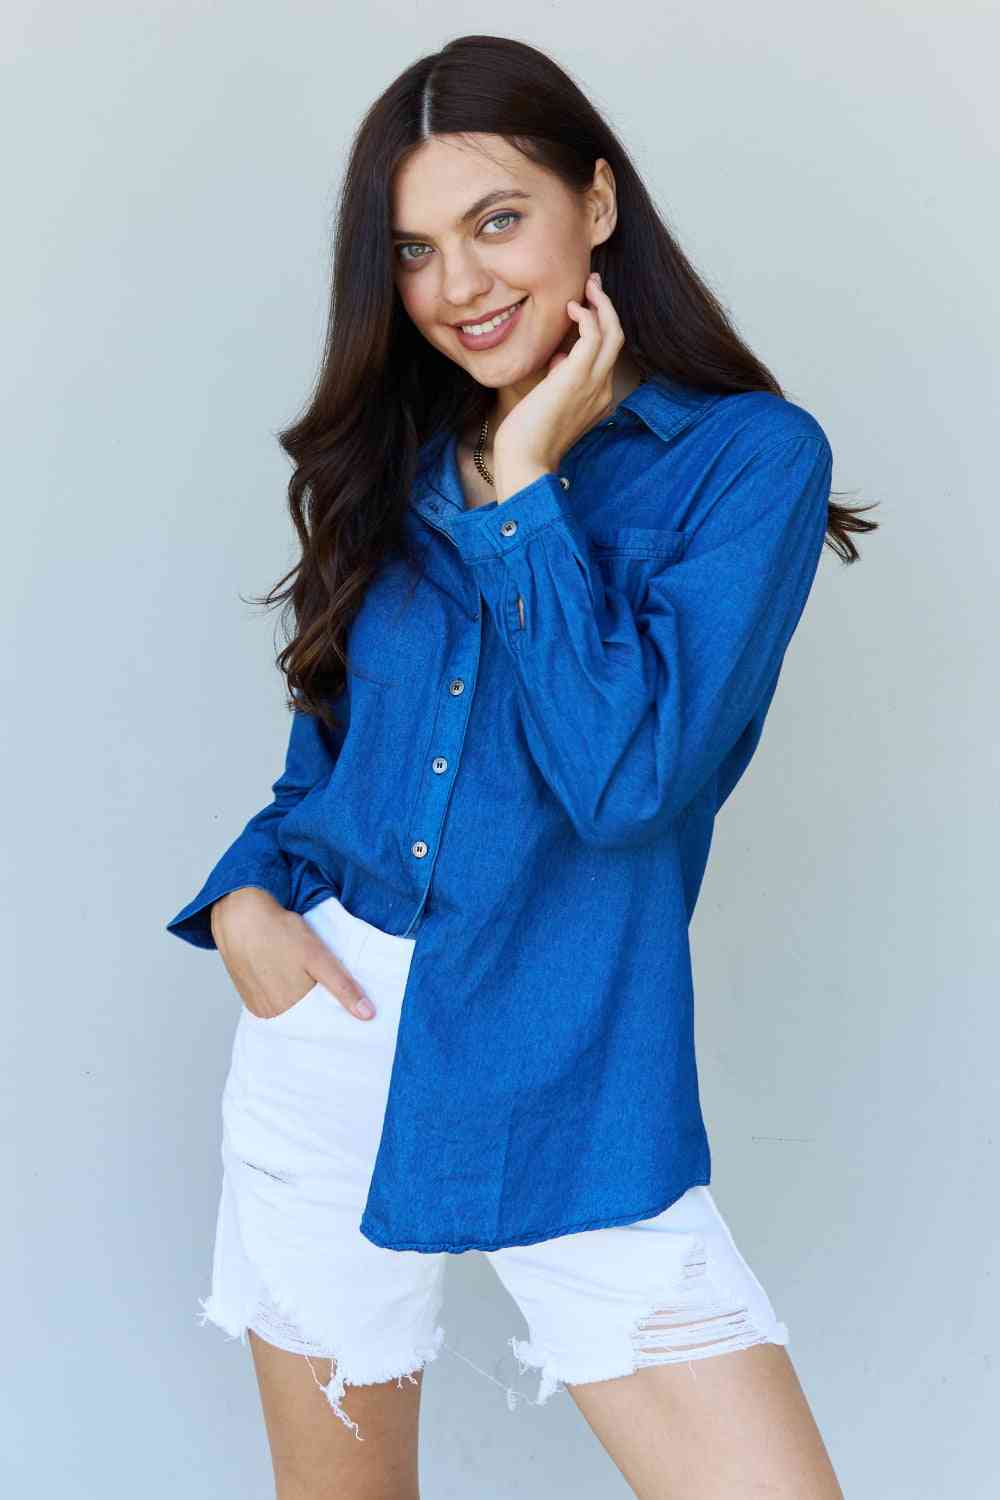 Blue Jean Baby Chambray Button Down Top in Dark Blue